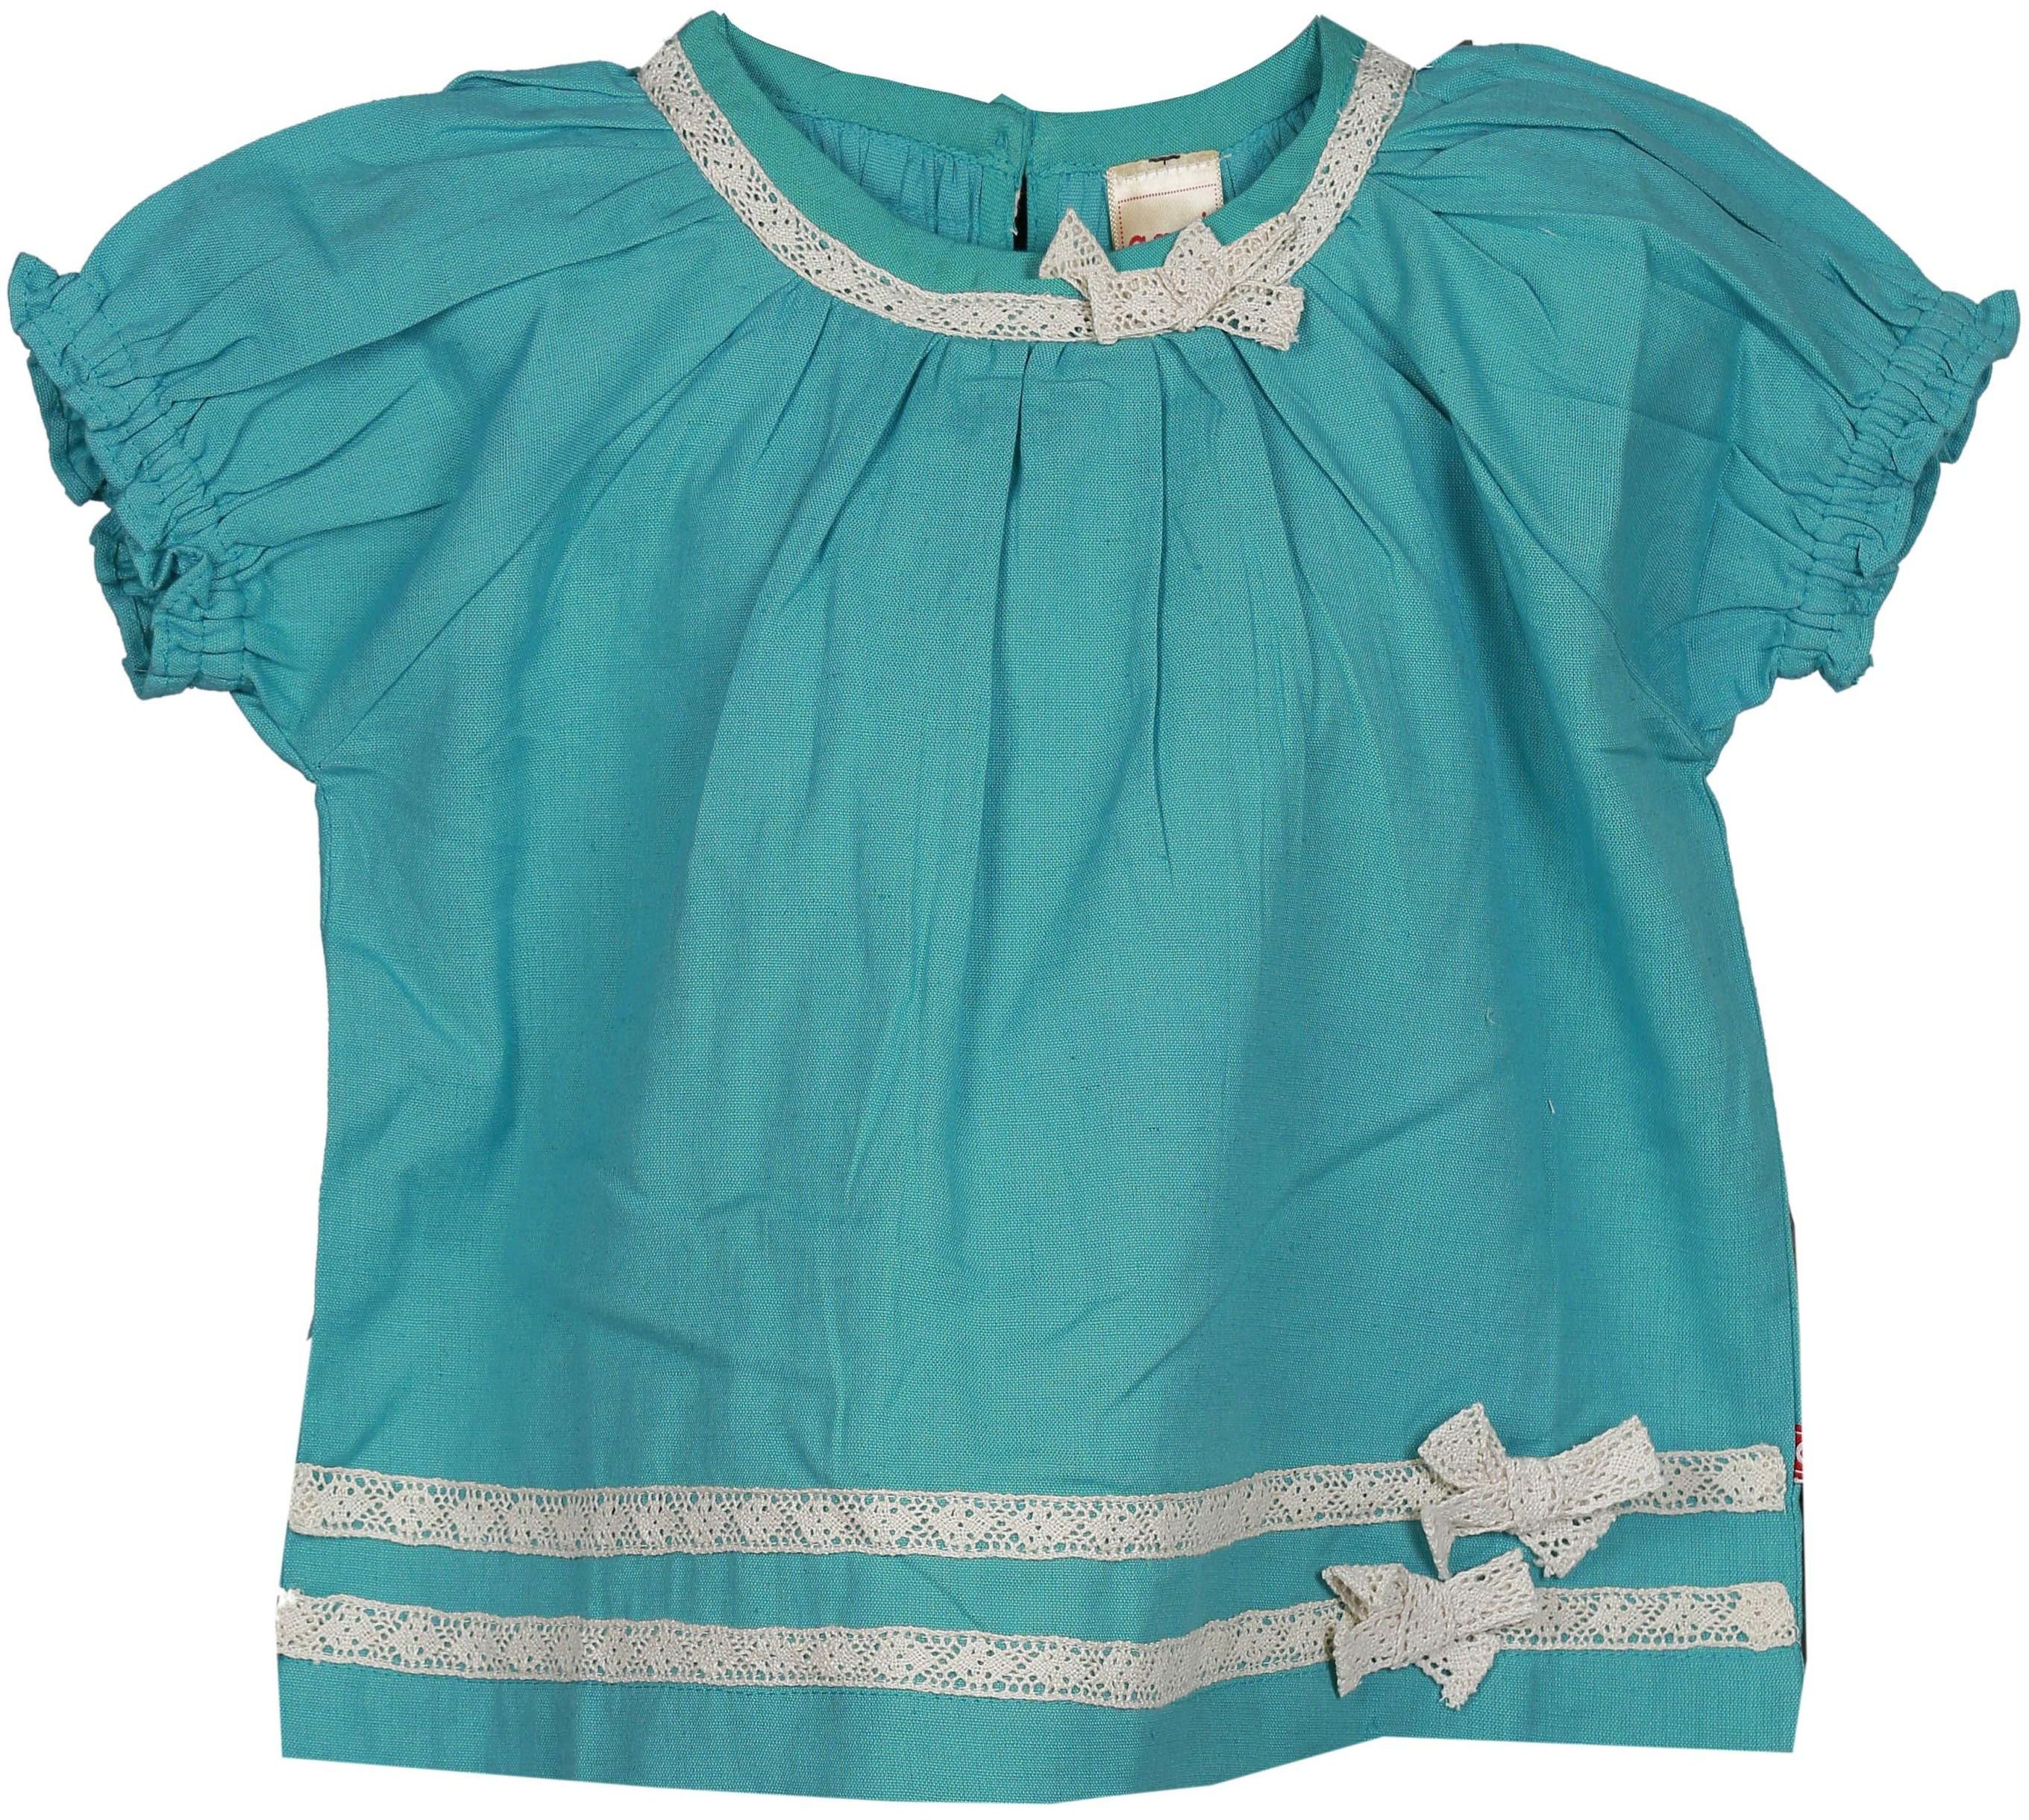 AOMI by Appleofmyi Girls Lace Top T5 Blue Size 5-6 Years